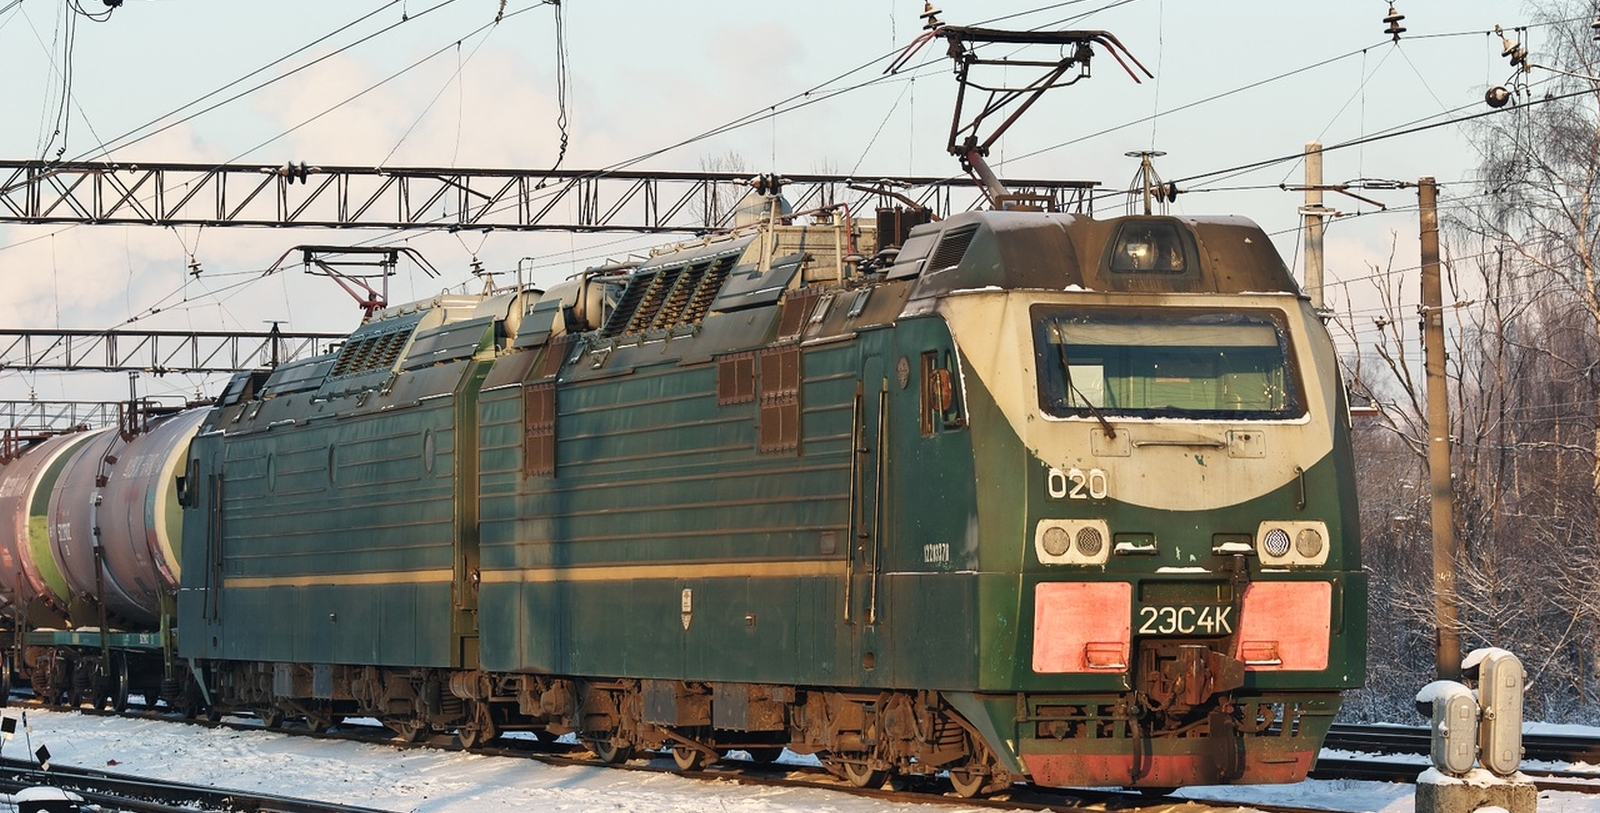 A 2ЭС4К in March 2016 at Ruchyi station in Saint Petersburg